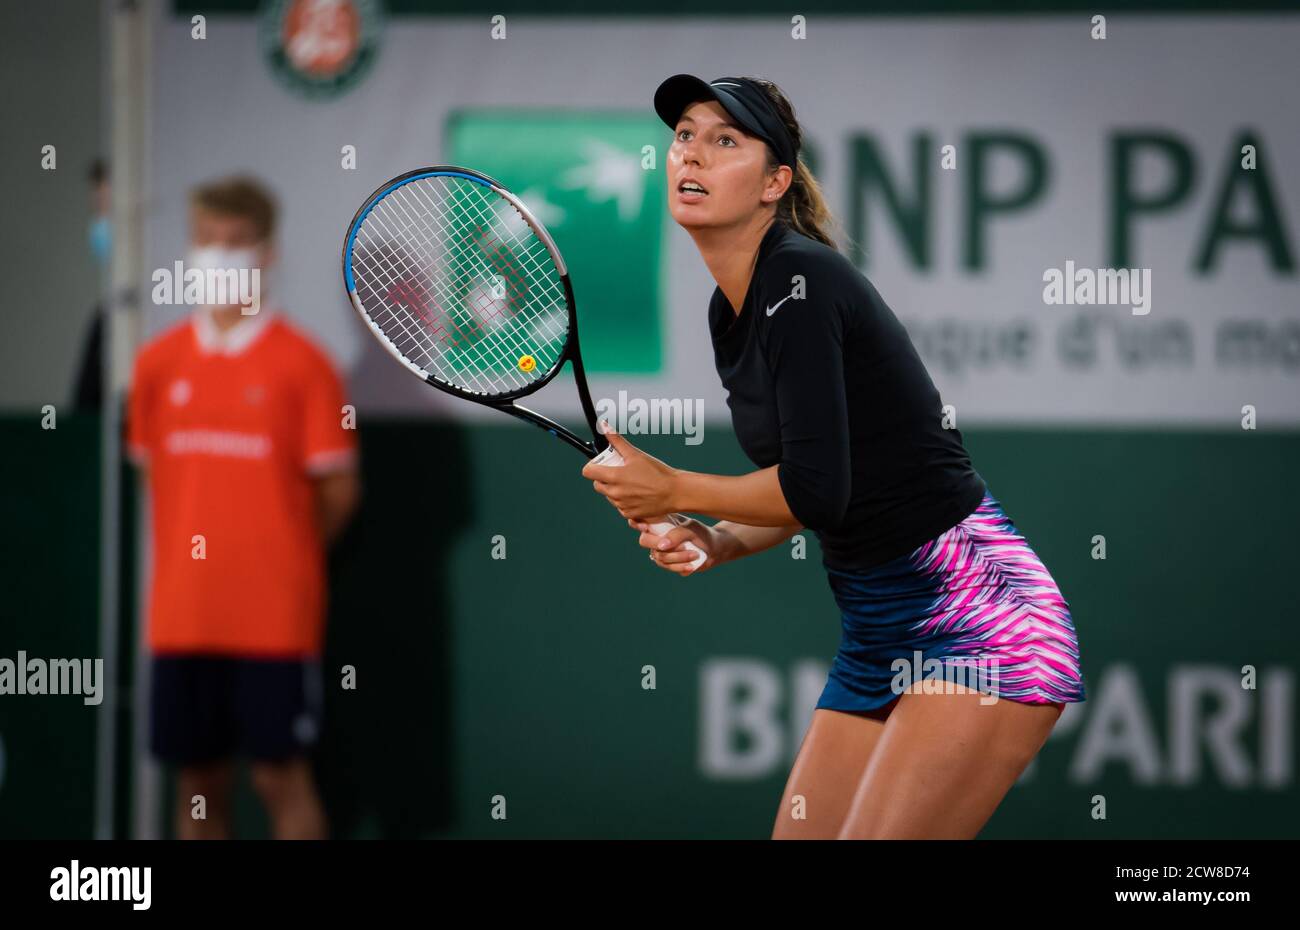 Oceane Dodin of France in action during the first round at the Roland Garros 2020, Grand Slam tennis tournament, on September 28, 2020 at Roland Garros stadium in Paris, France - Photo Rob Prange / Spain DPPI / DPPI Credit: LM/DPPI/Rob Prange/Alamy Live News Stock Photo